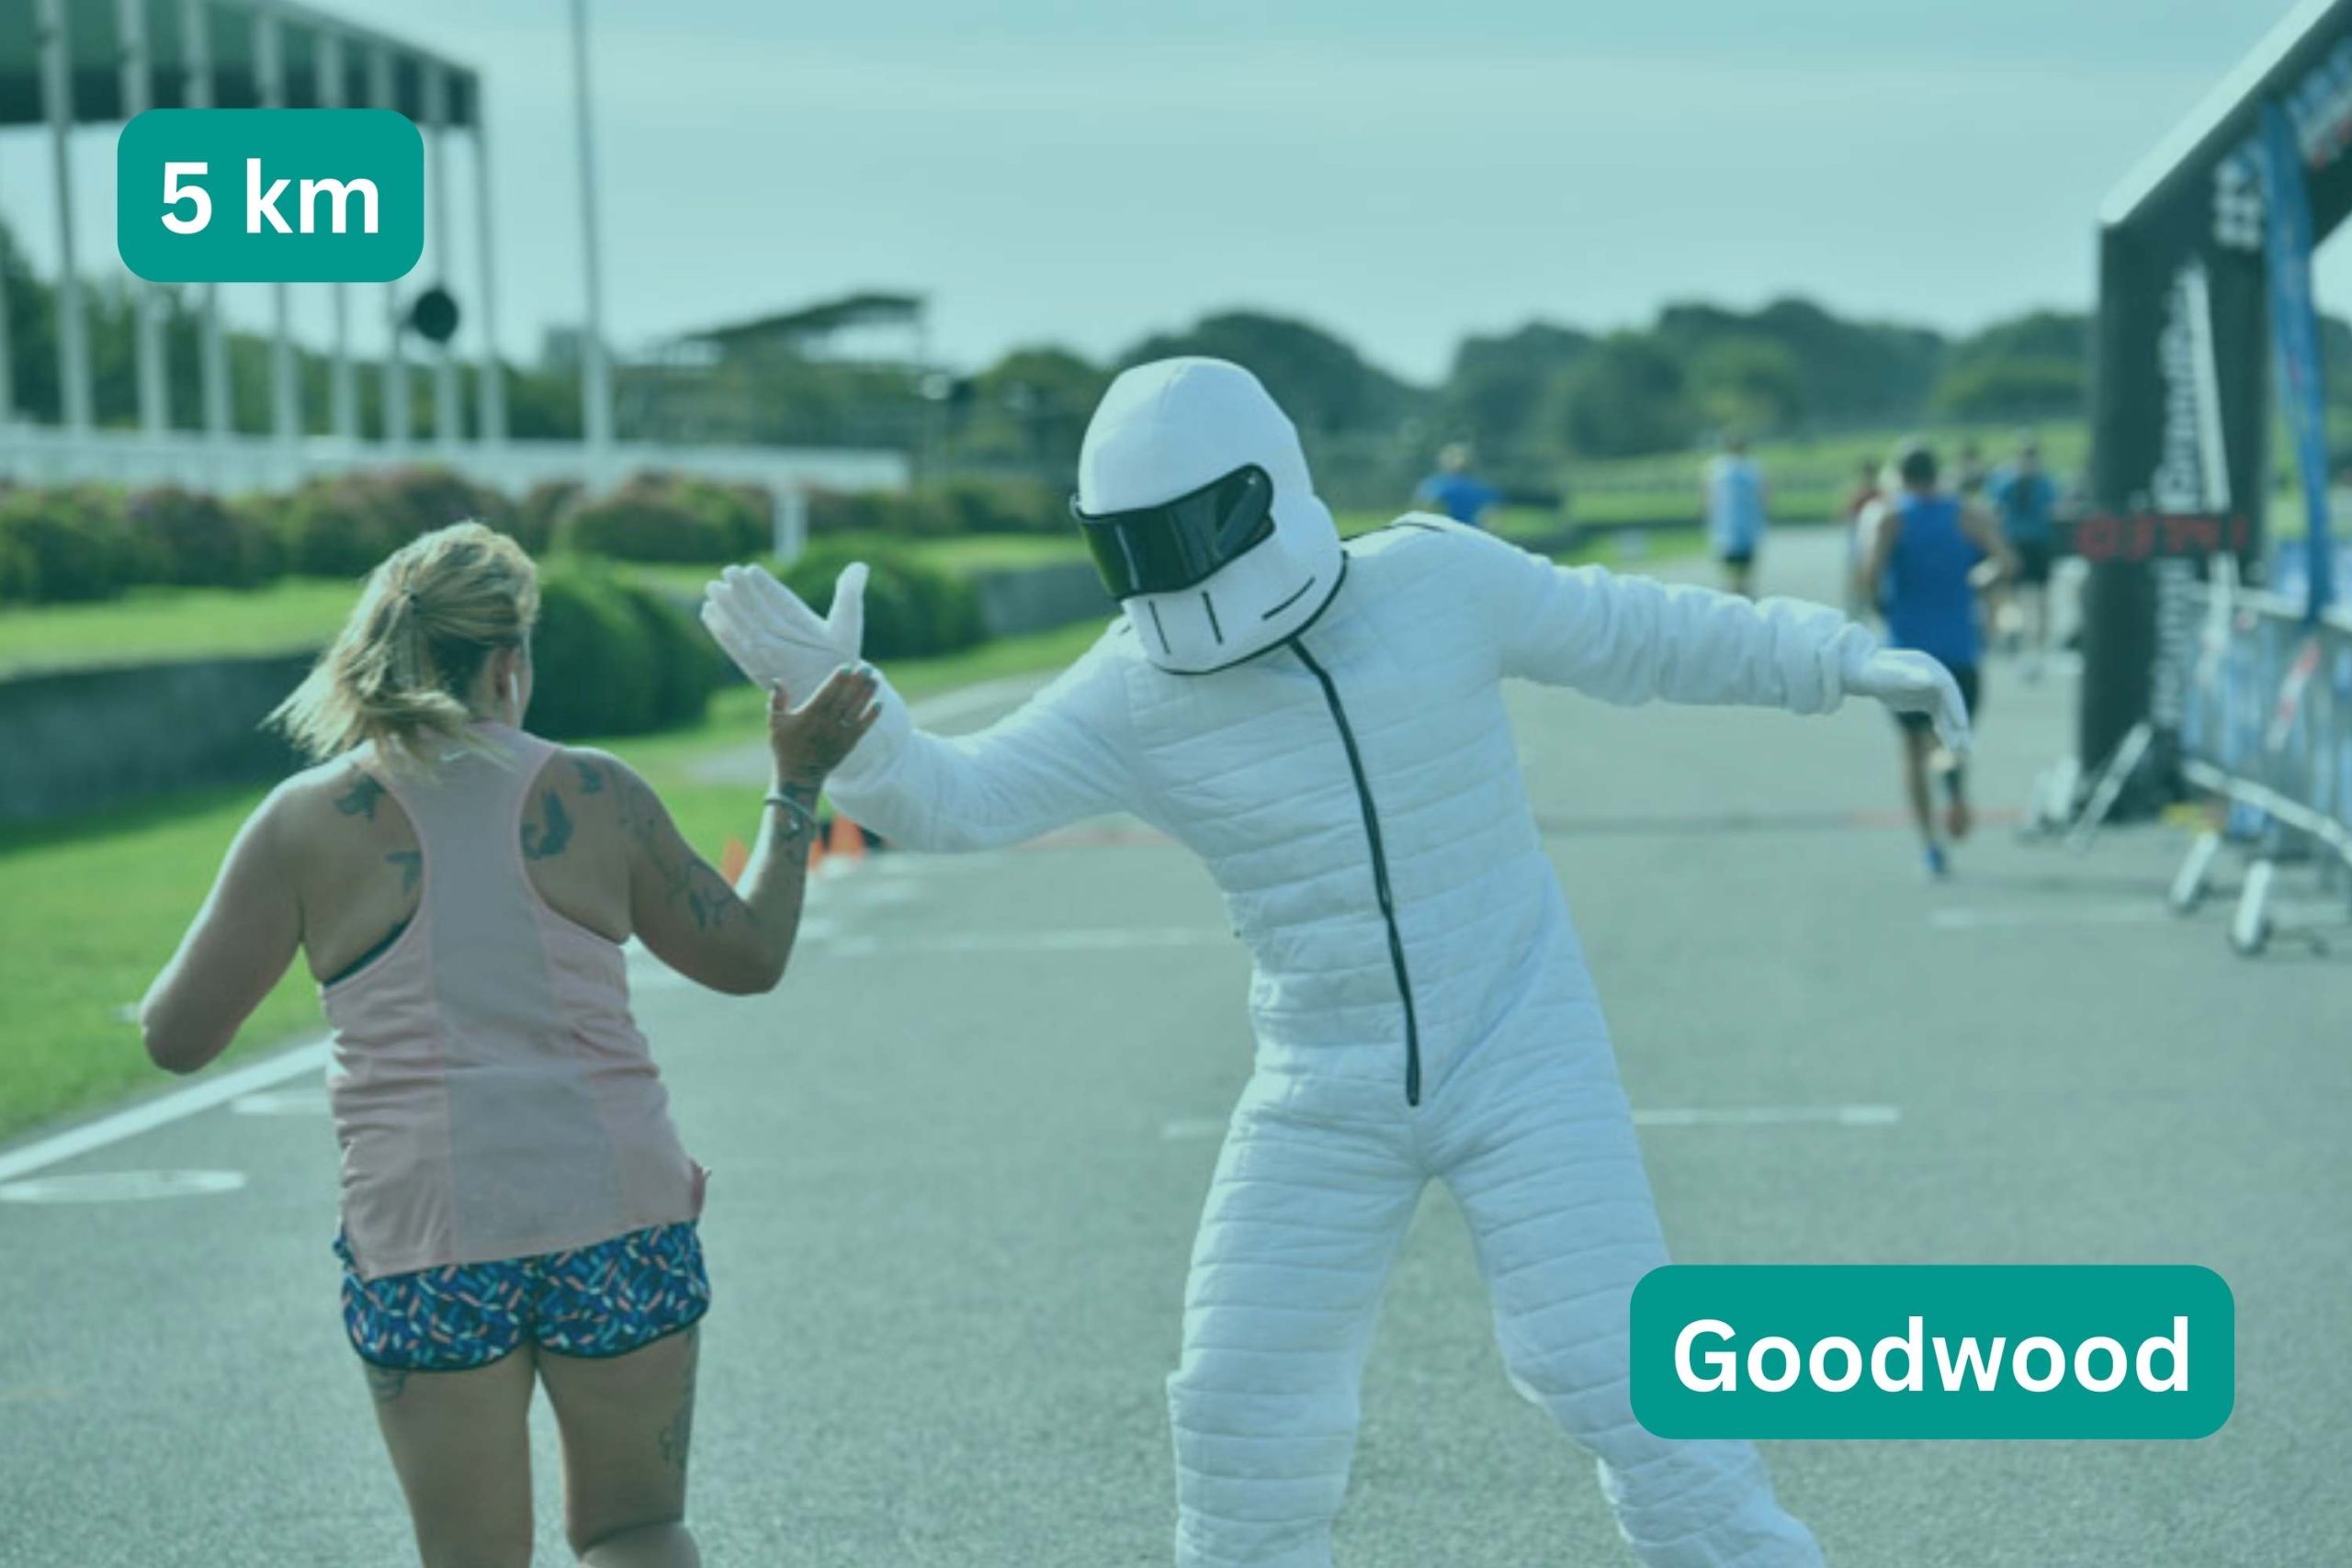 Woman giving the Stig a high five. title text 5 km Goodwood